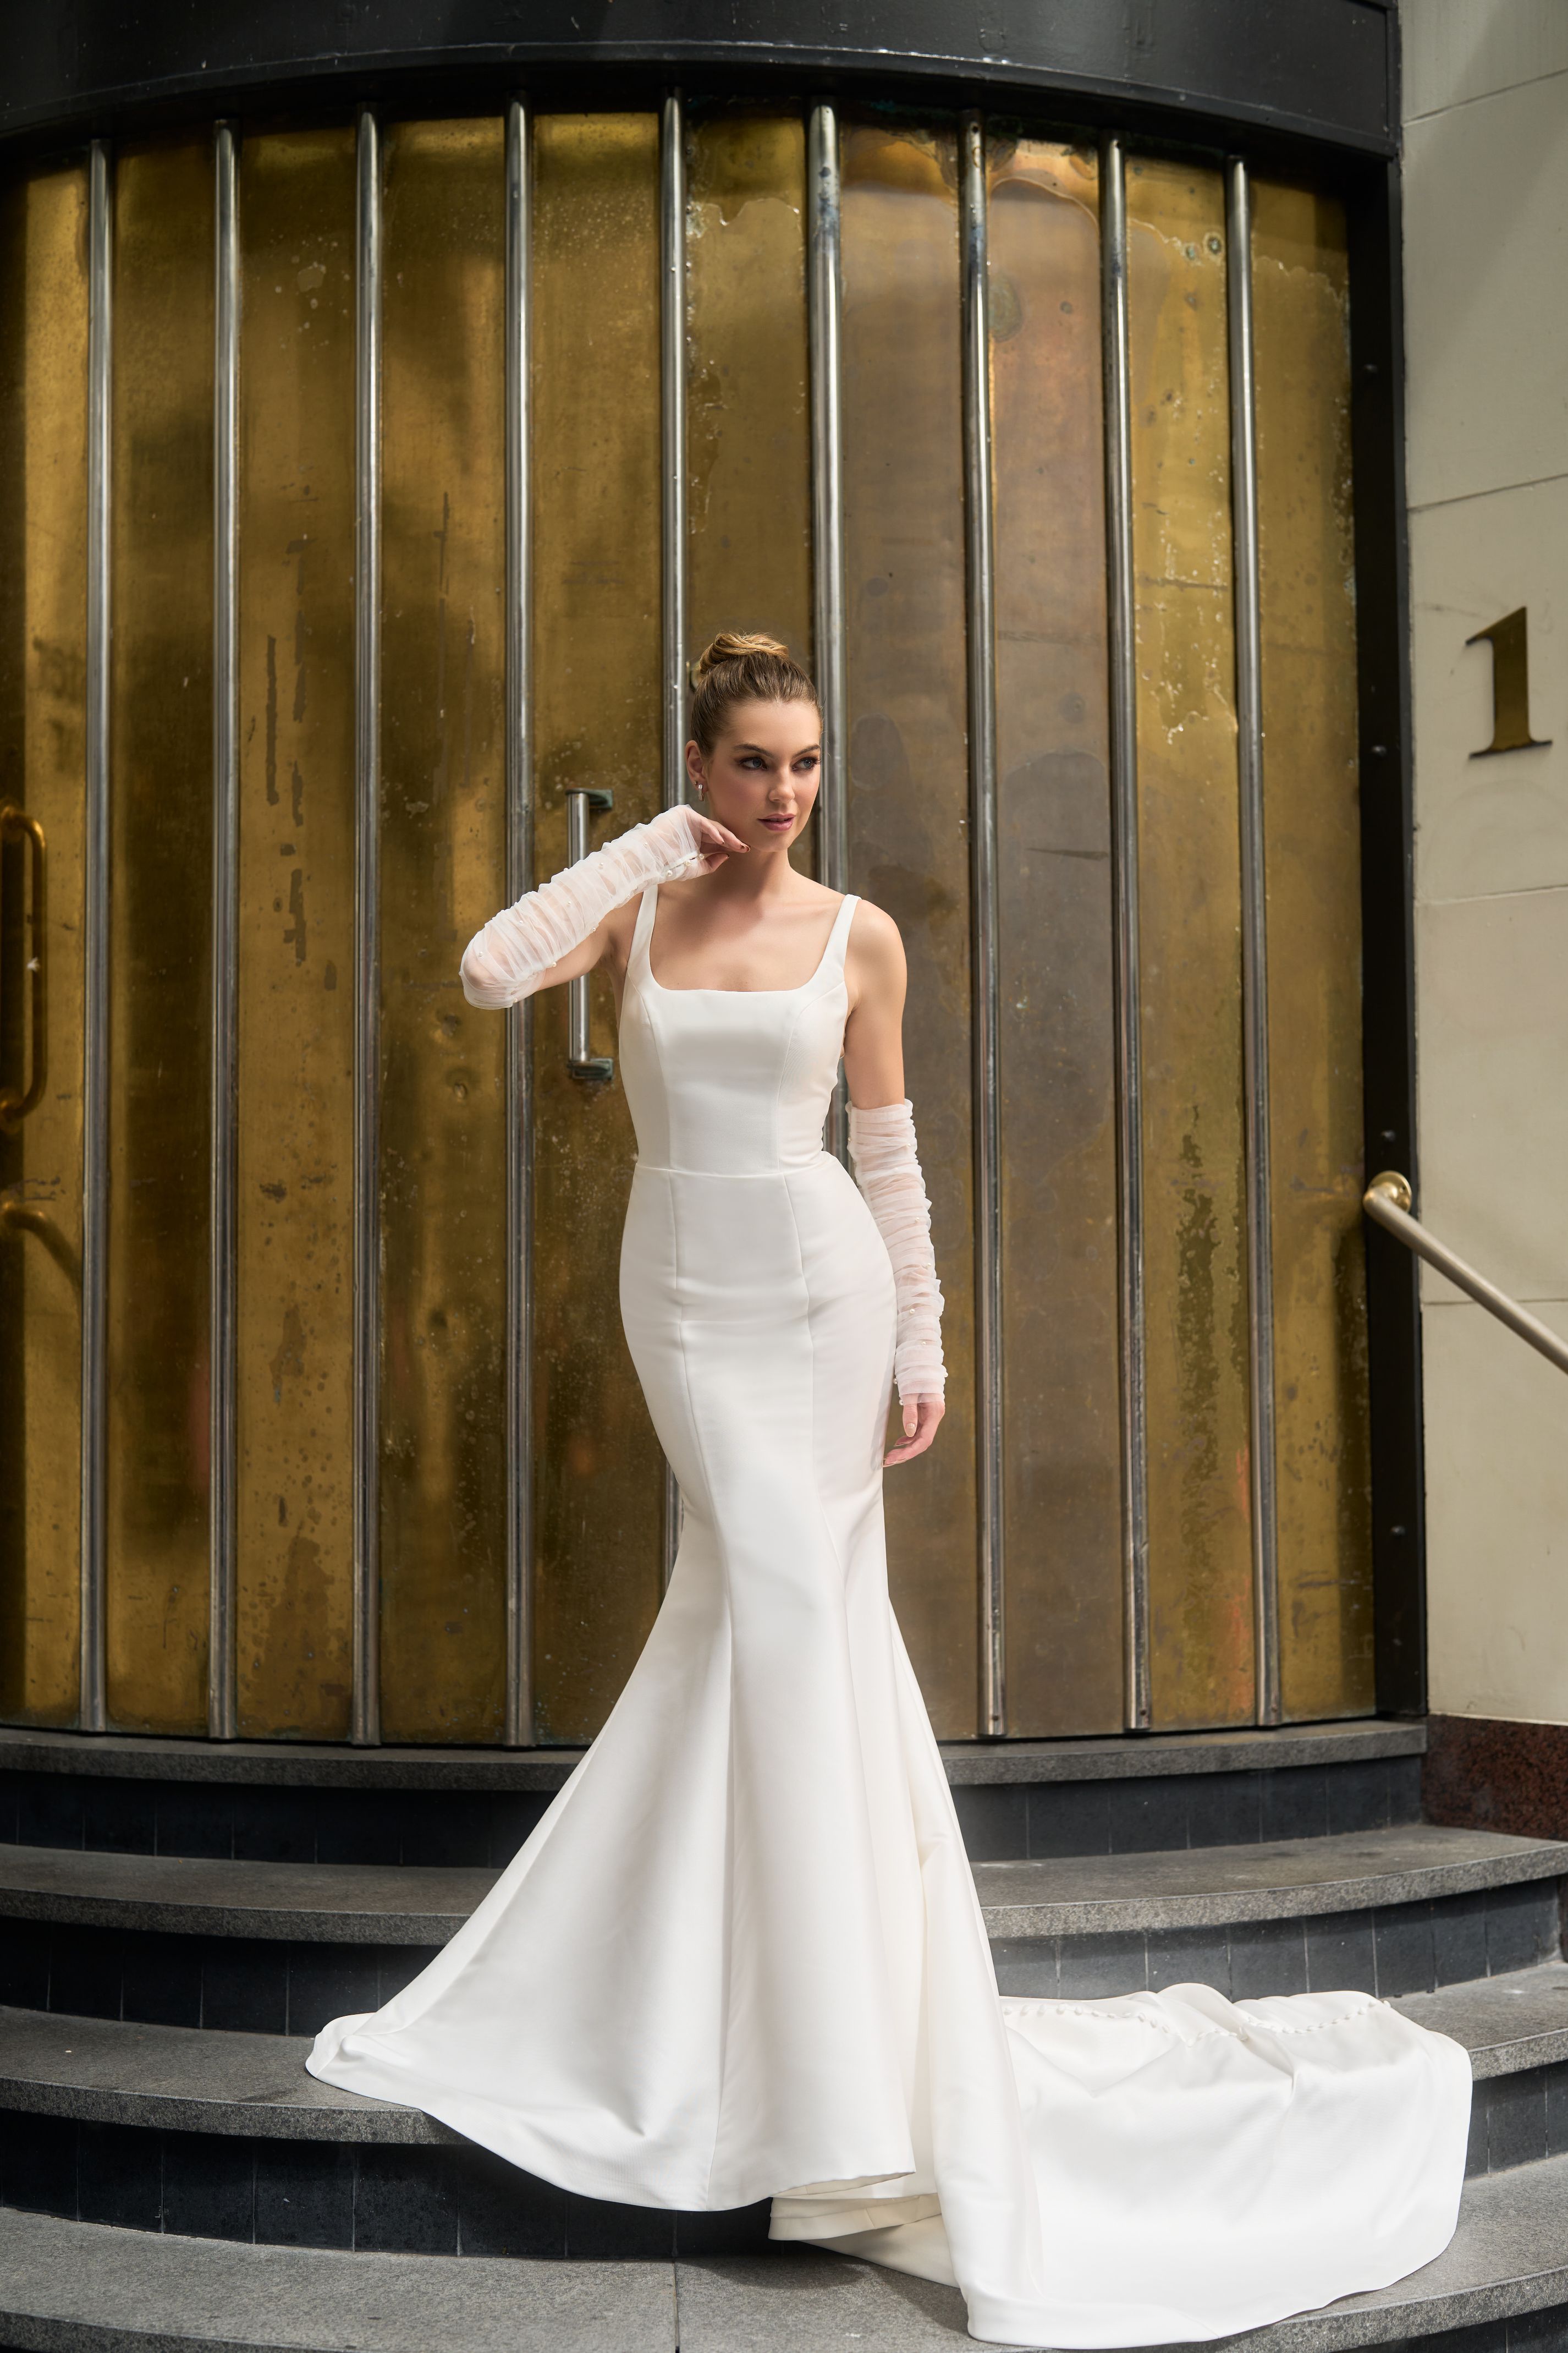 Ivory mikado minimalist gown with rouched tulle separate sleeves. Fit-n-flare shape with square neckline.